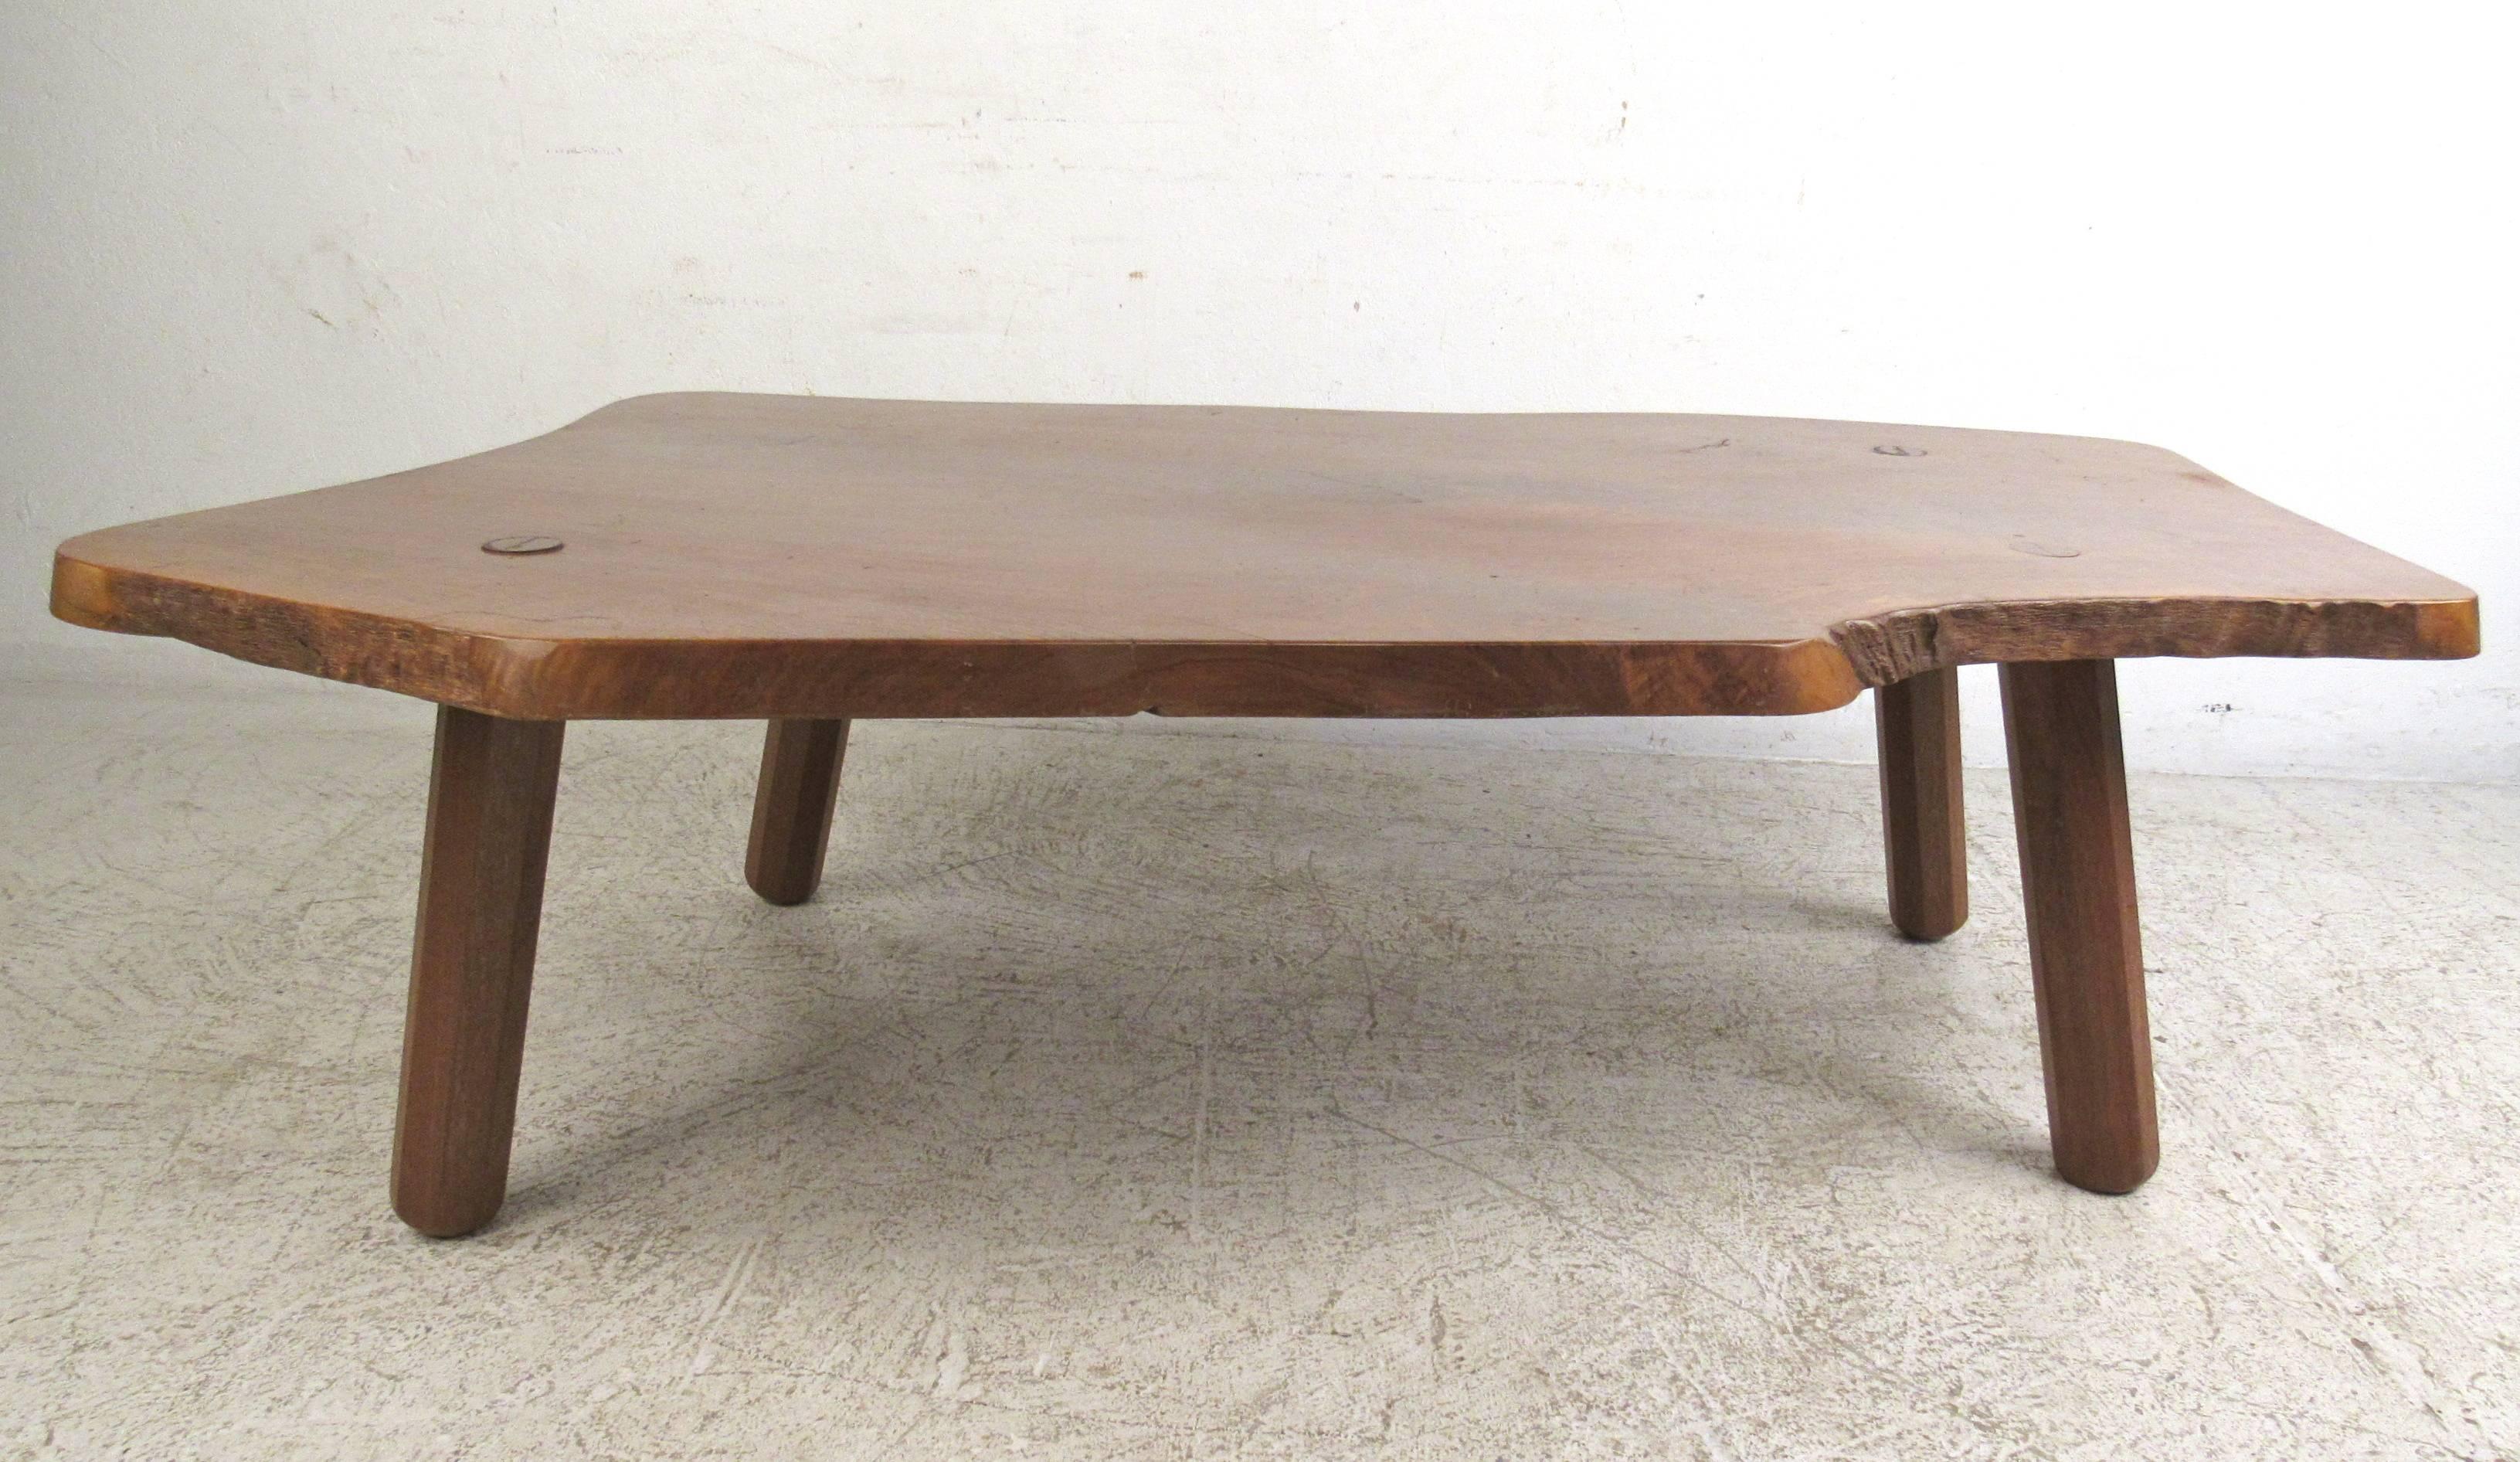 This Mid-Century live edge coffee table features a thick tree slab top mounted on hardwood legs. Wonderful vintage rustic appeal makes this large and uniquely shaped coffee table a visually impressive addition to a variety of interiors. Please